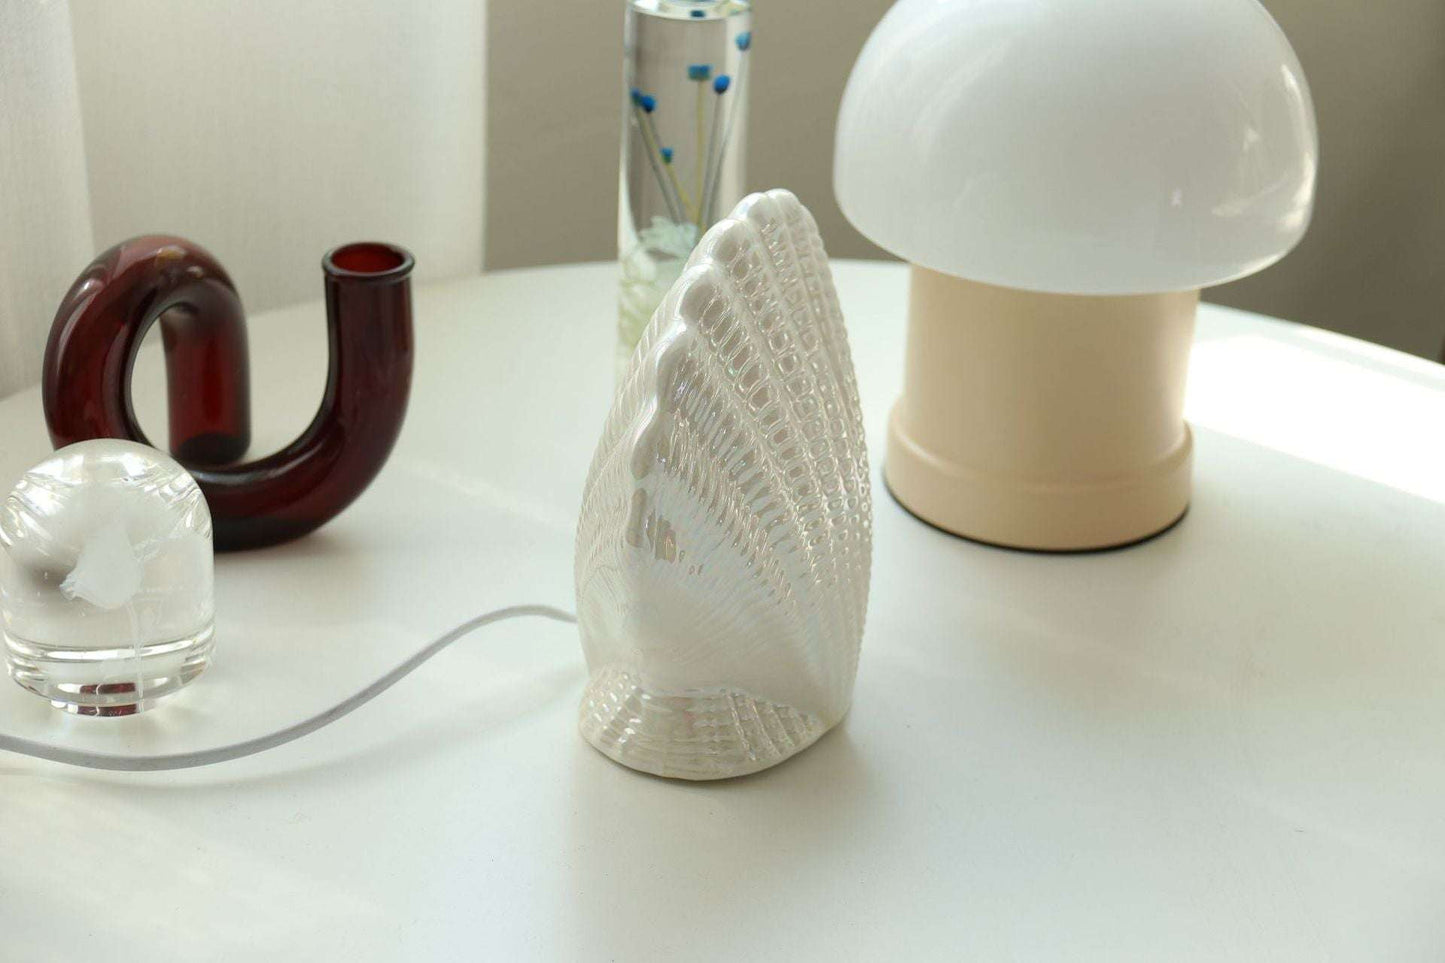 Bedroom Table Lighting, Ceramic Shell Lamp, Decorative Bedside Lamp - available at Sparq Mart